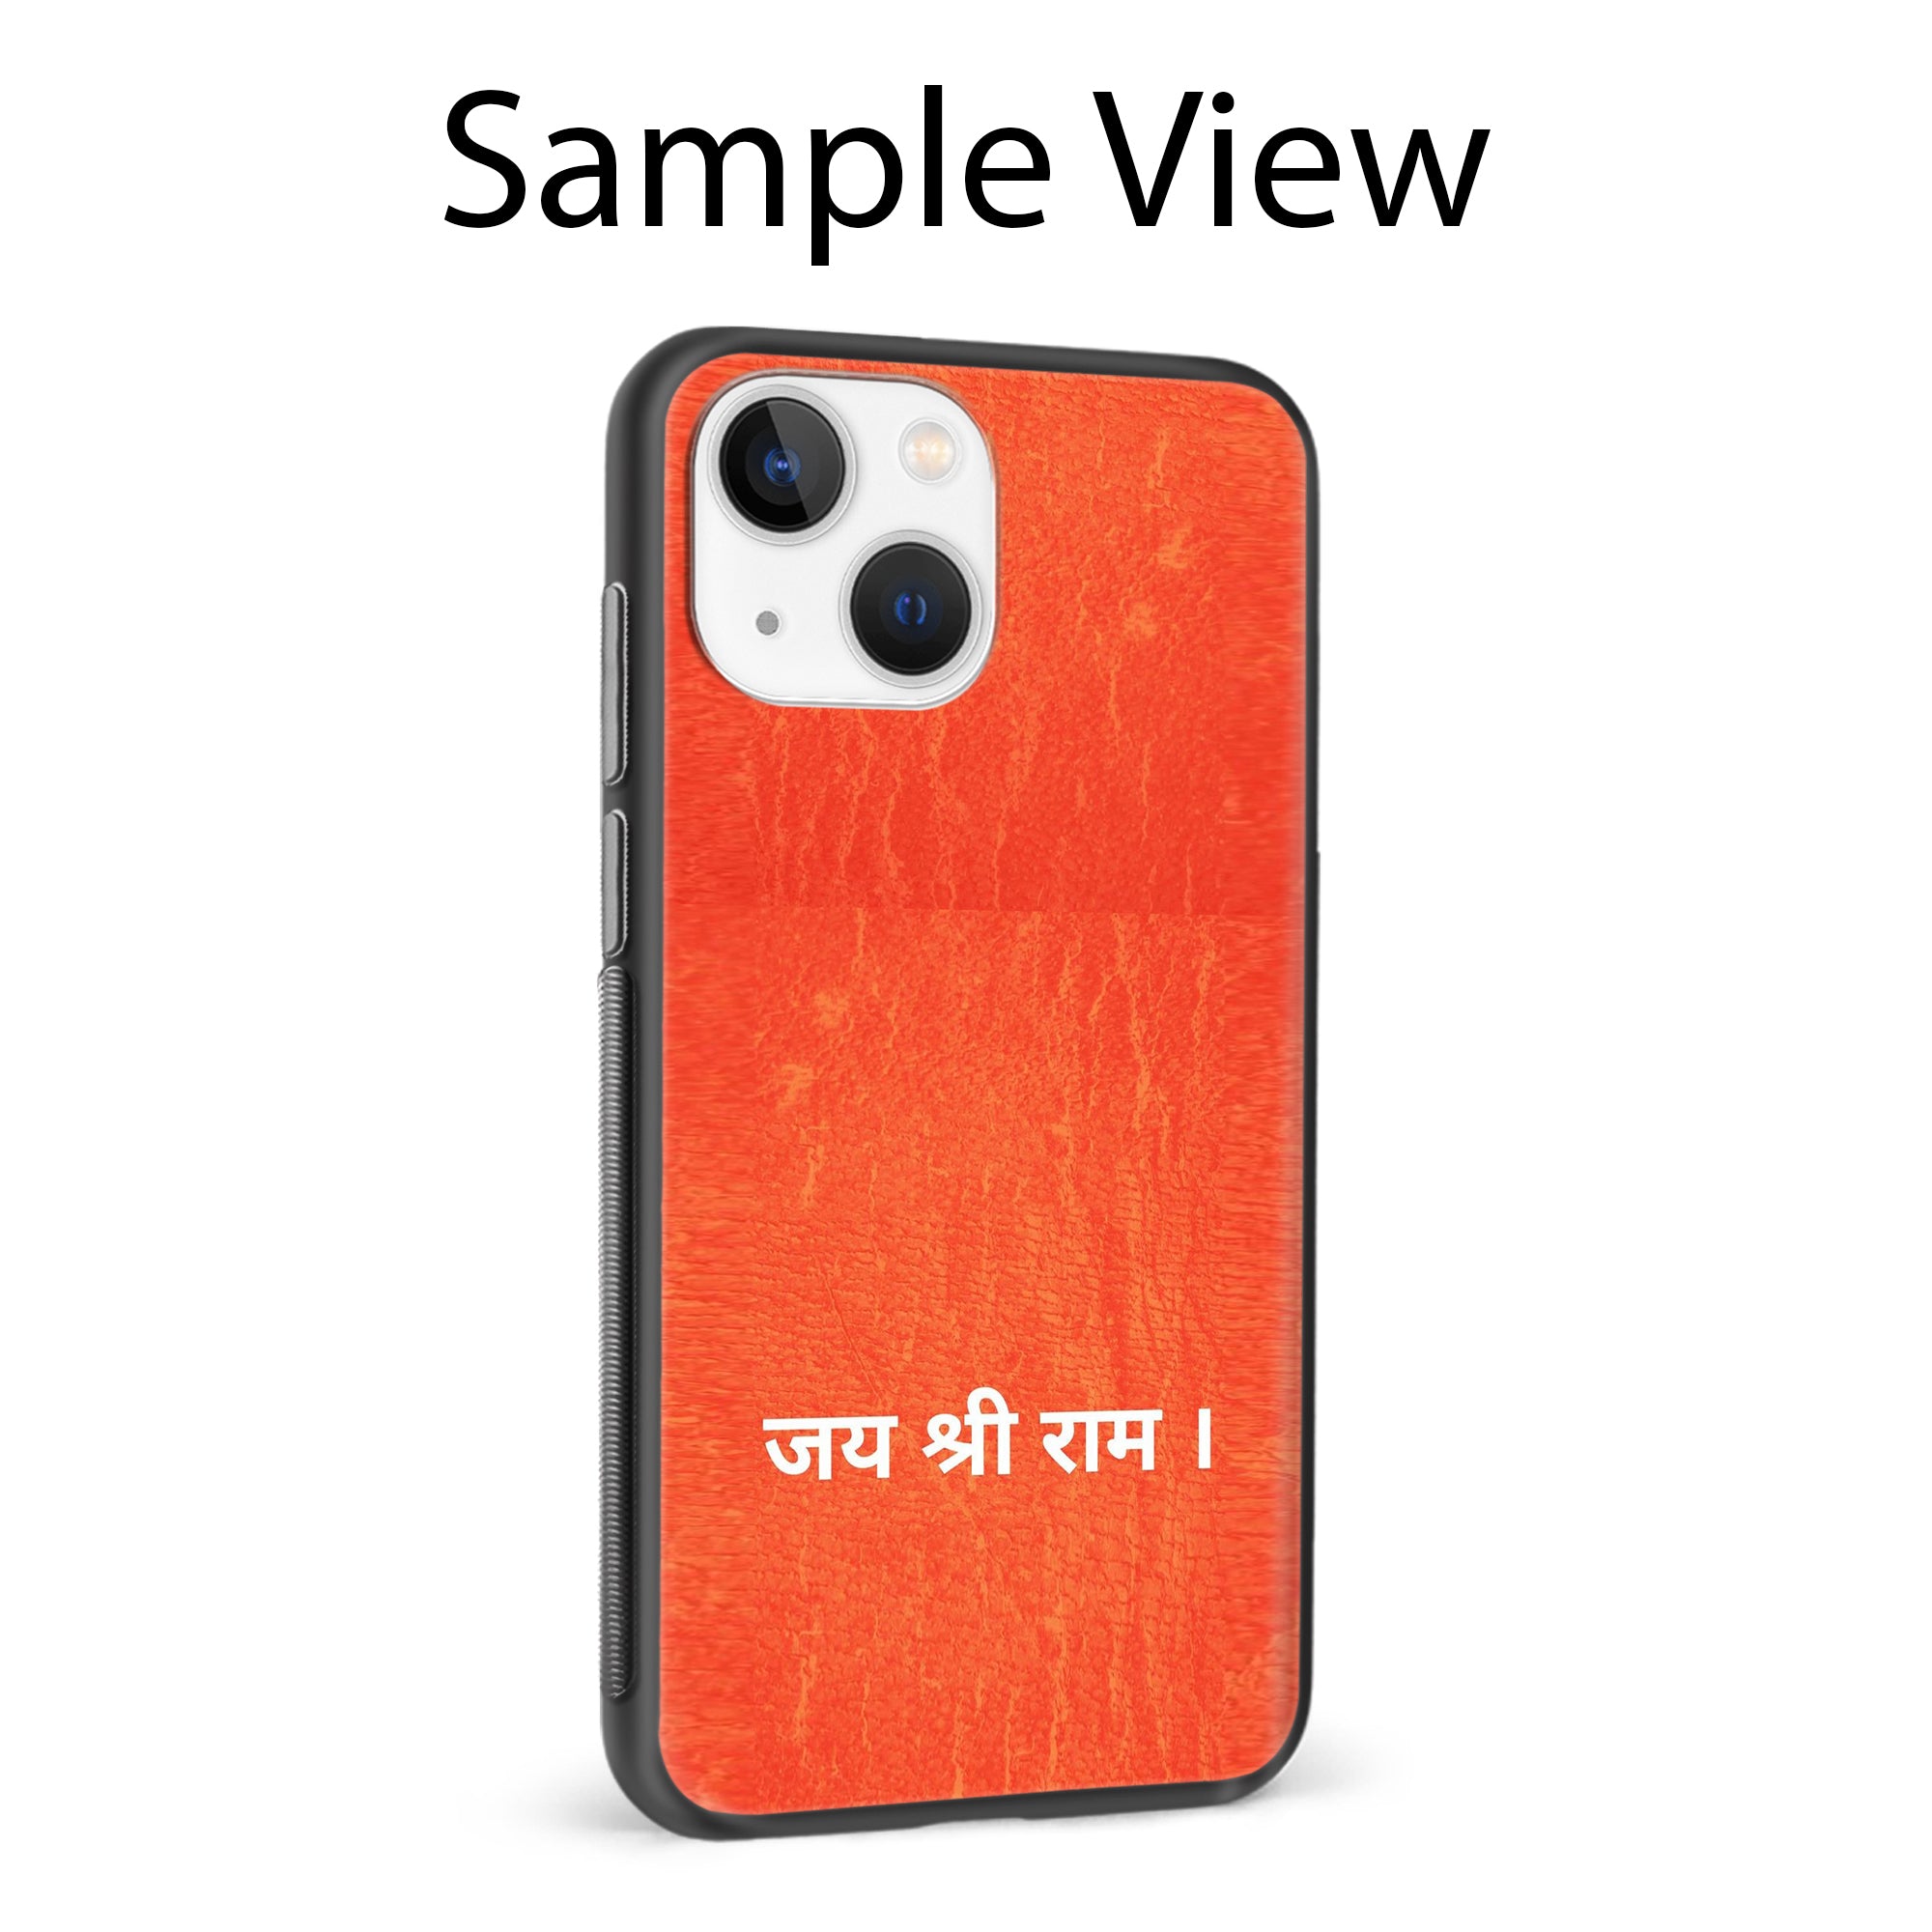 Buy Jai Shree Ram Metal-Silicon Back Mobile Phone Case/Cover For Samsung Galaxy M32 Online